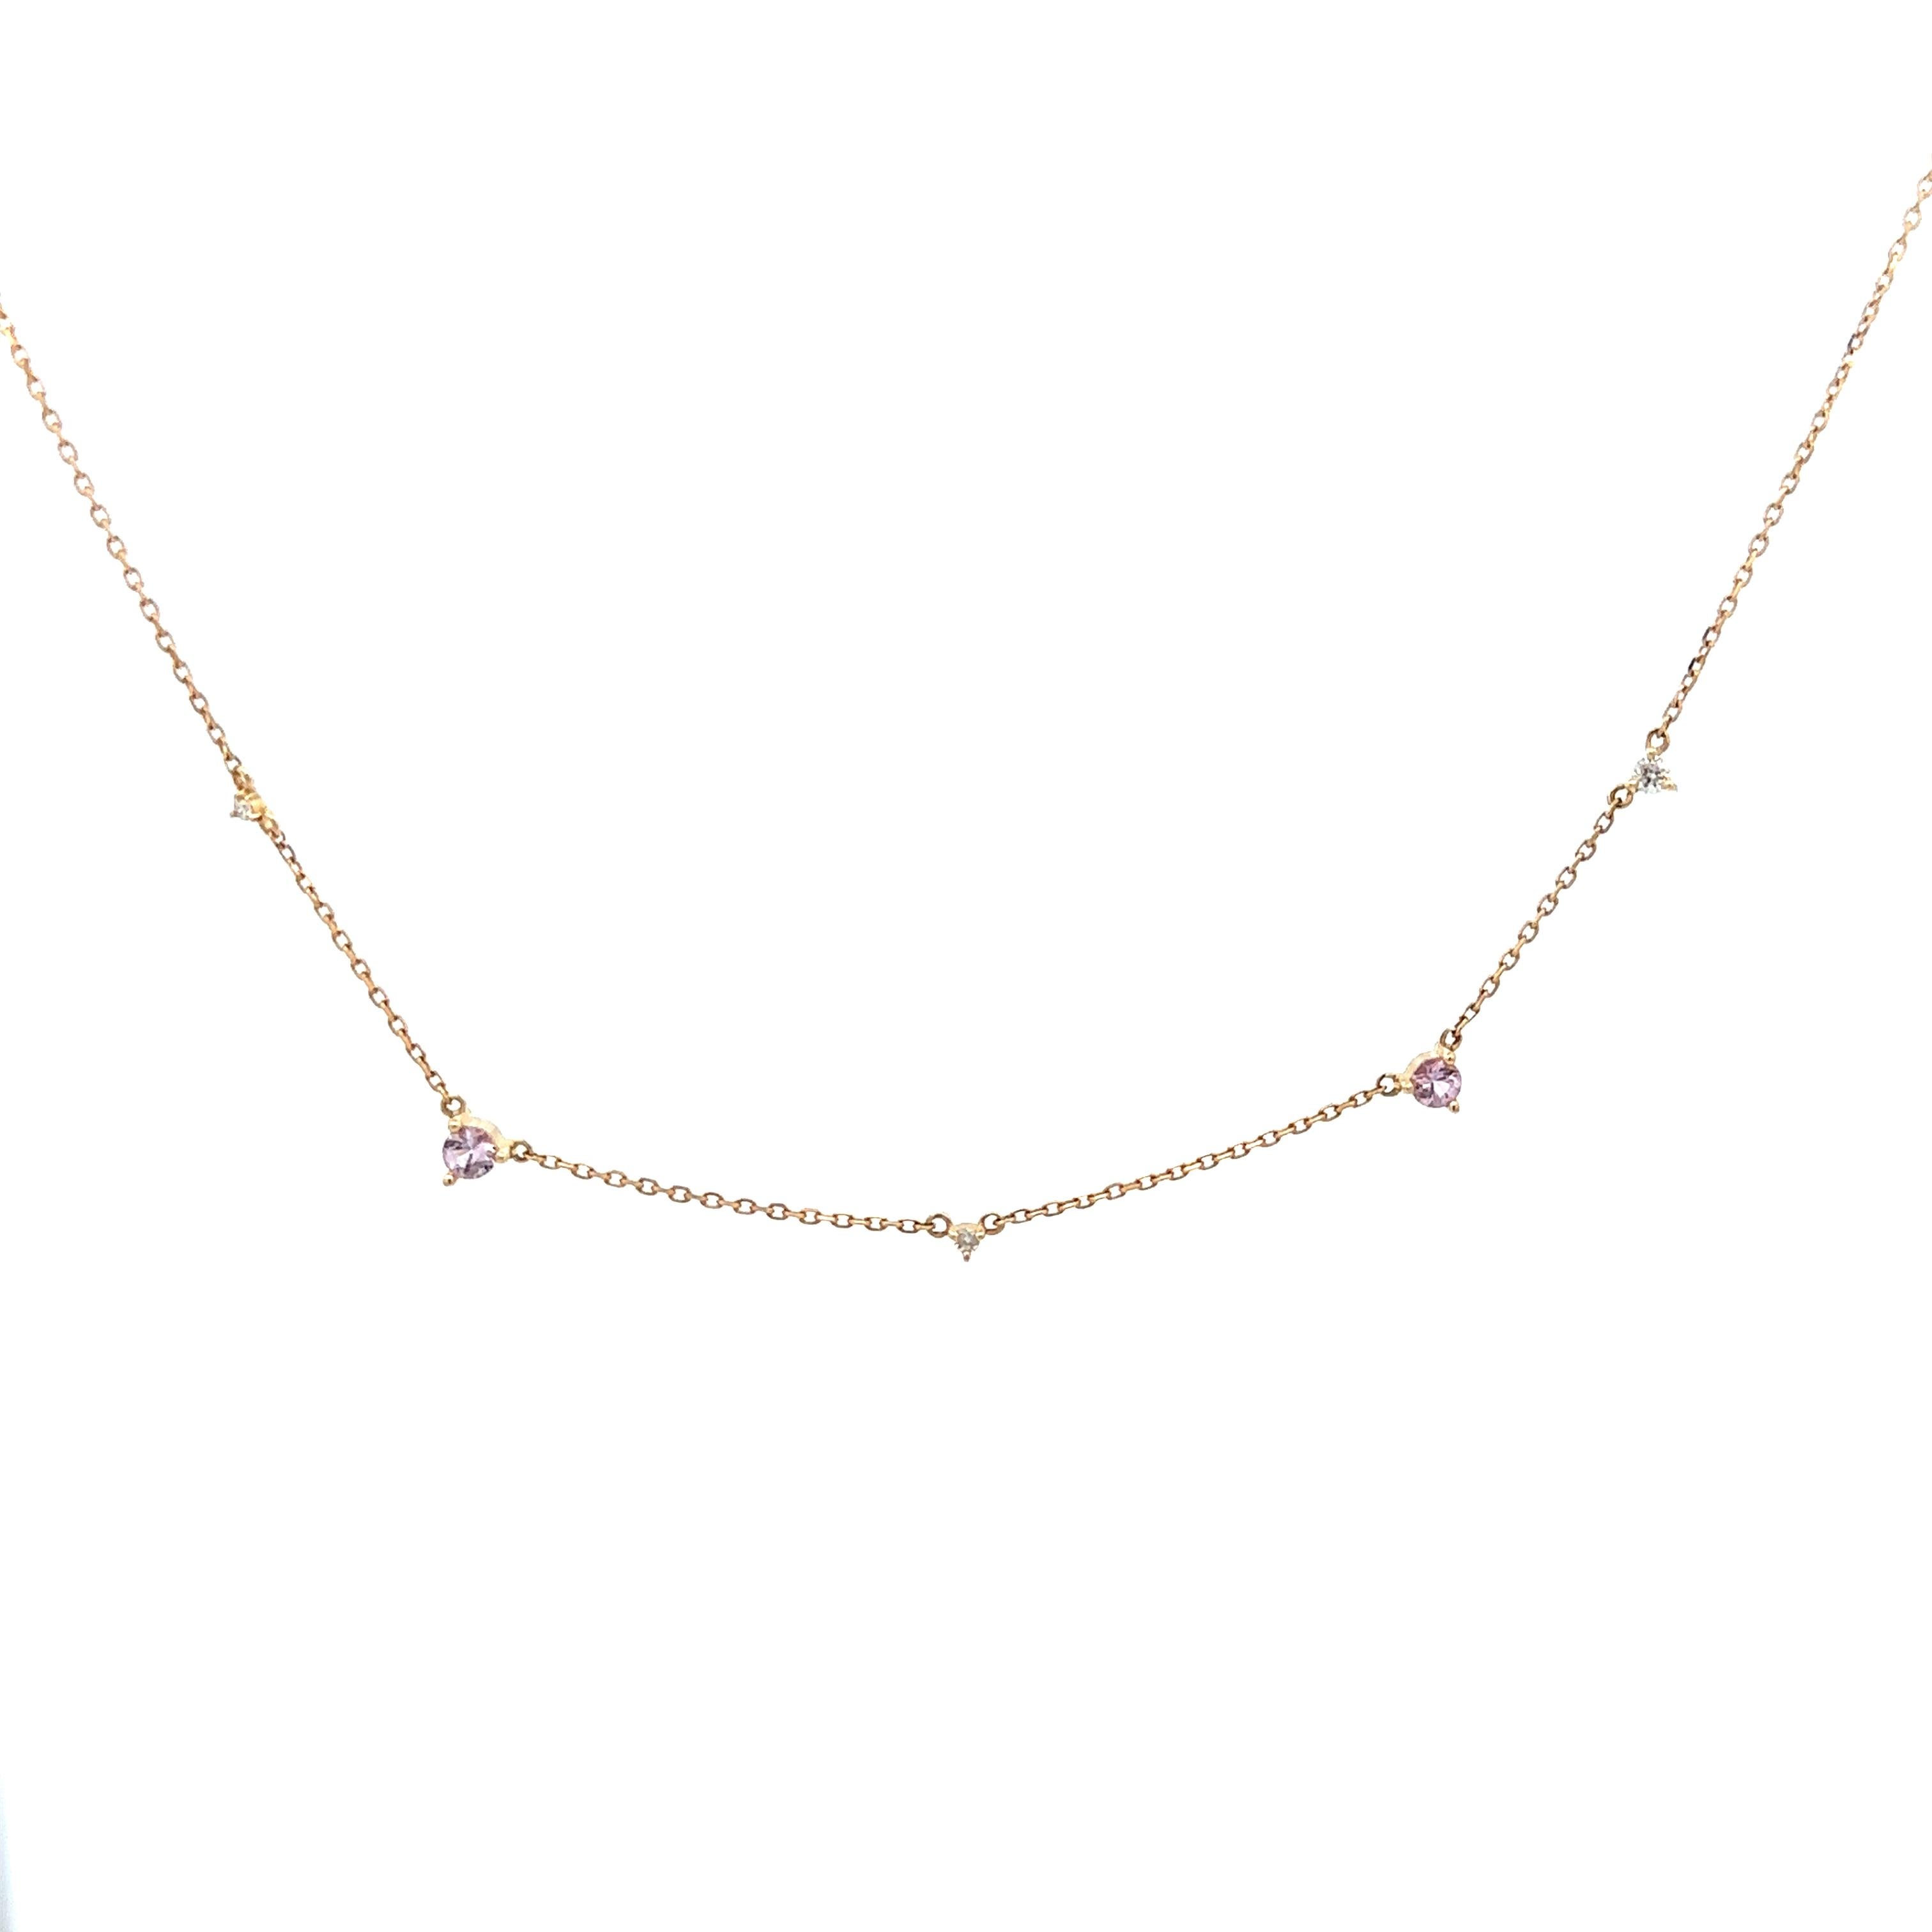 Adina Reyter One of a Kind Pink Sapphire + Diamond Station Necklace in 14K Yellow Gold. 

14k yellow gold necklace with prong-set pink sapphire and diamonds. 5 mixed-sized diamonds and pink sapphires measure 25mm apart. Adjustable 15/16